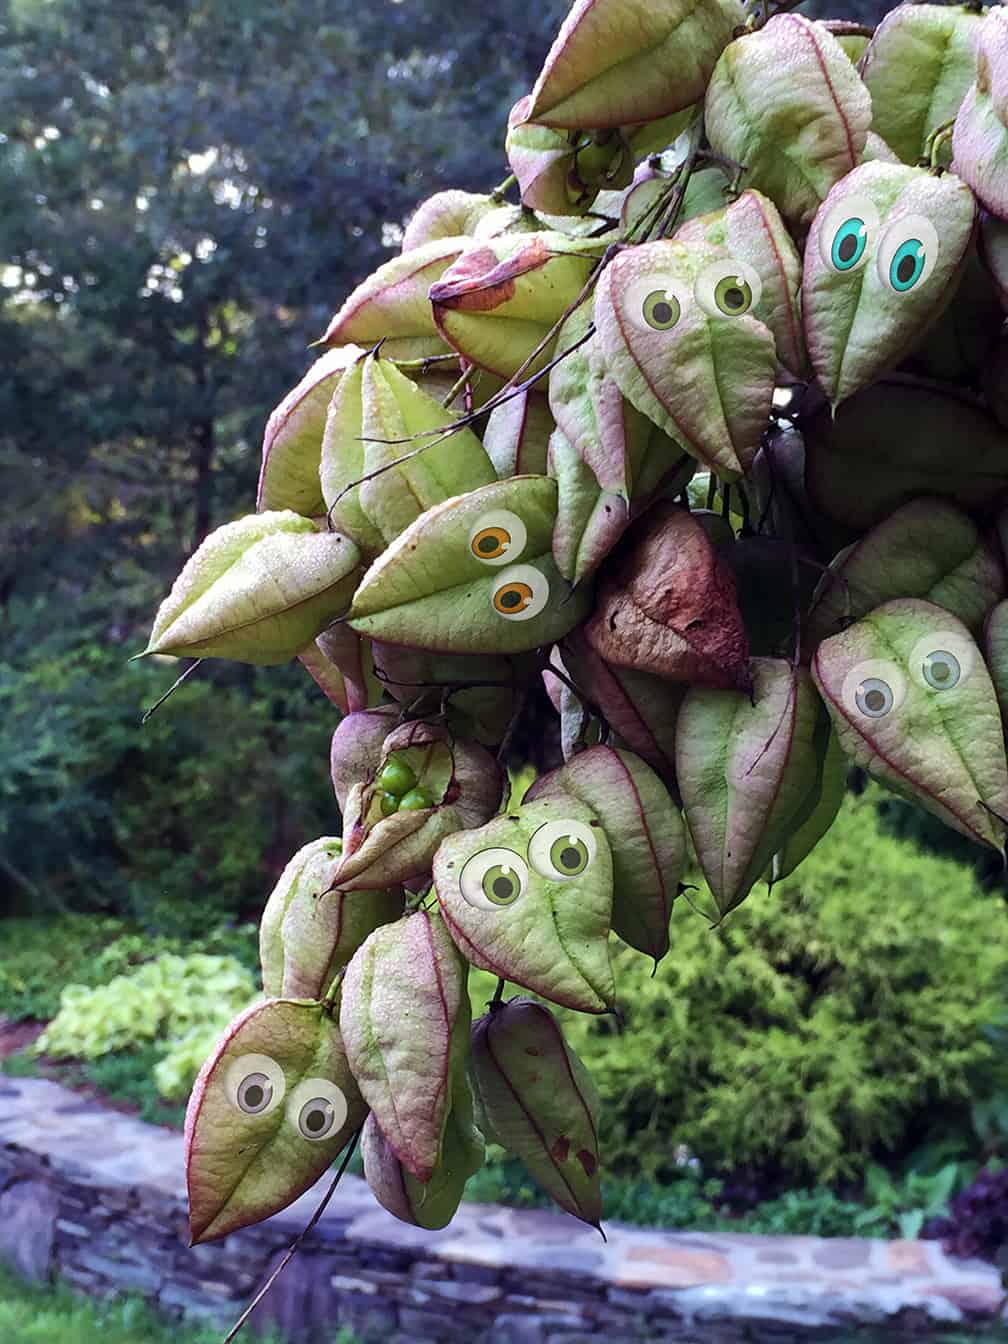 The pods just beg to have googly eyes added in Photoshop. Do you ever feel like you're being watched in the garden?